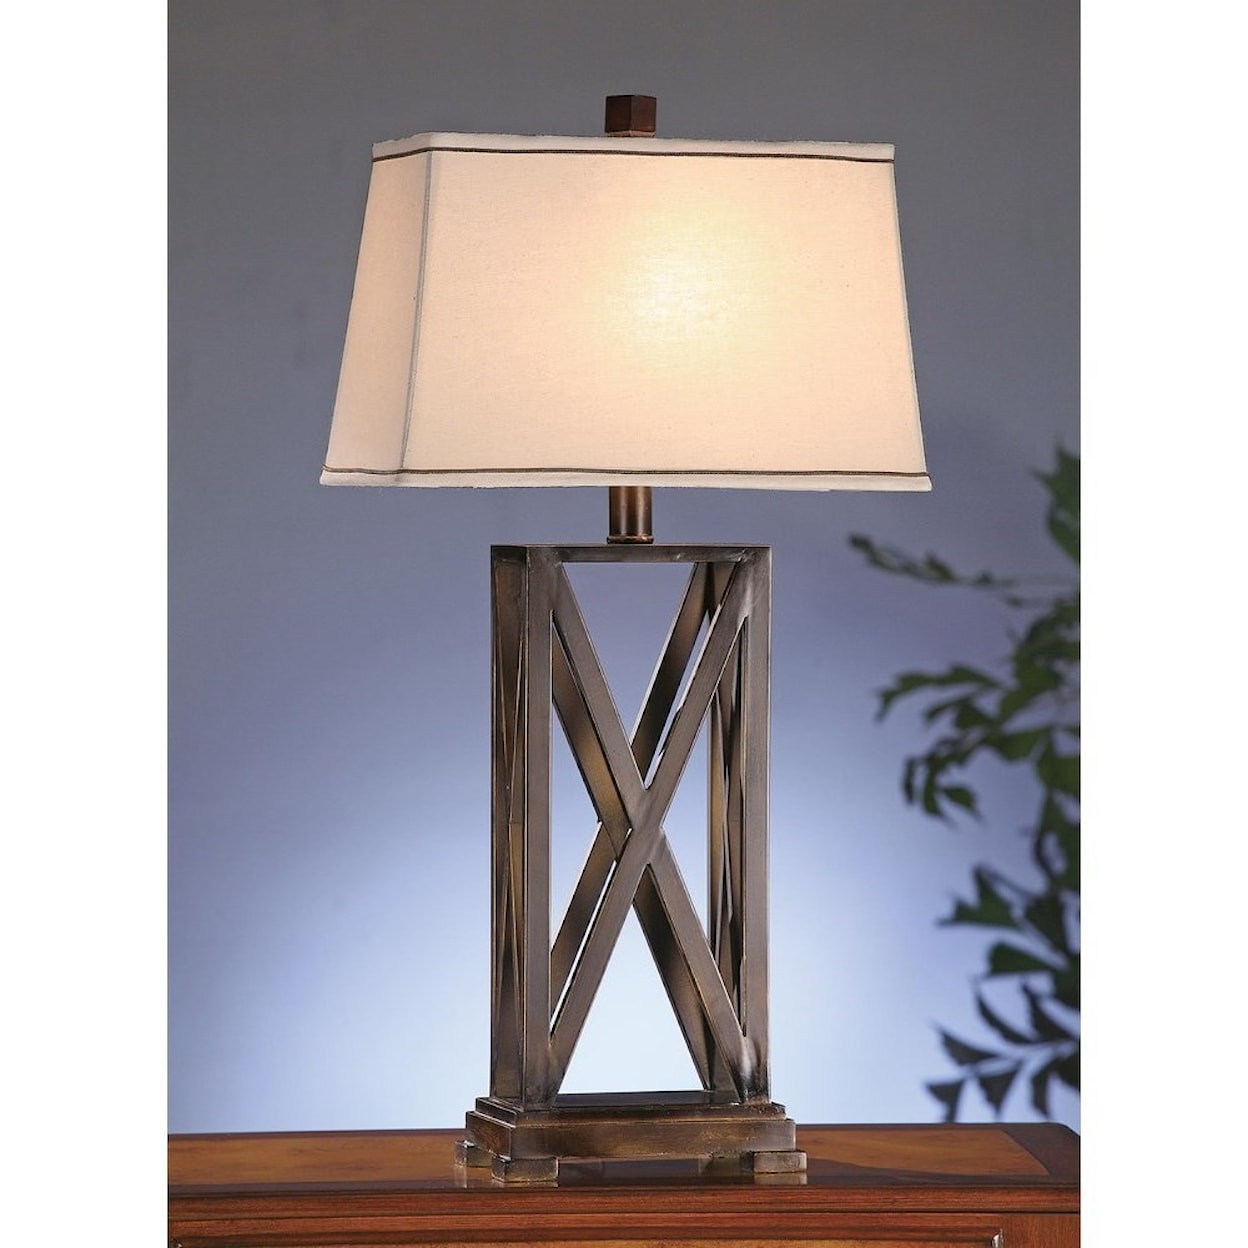 Crestview Collection Lighting Everson Table Lamp